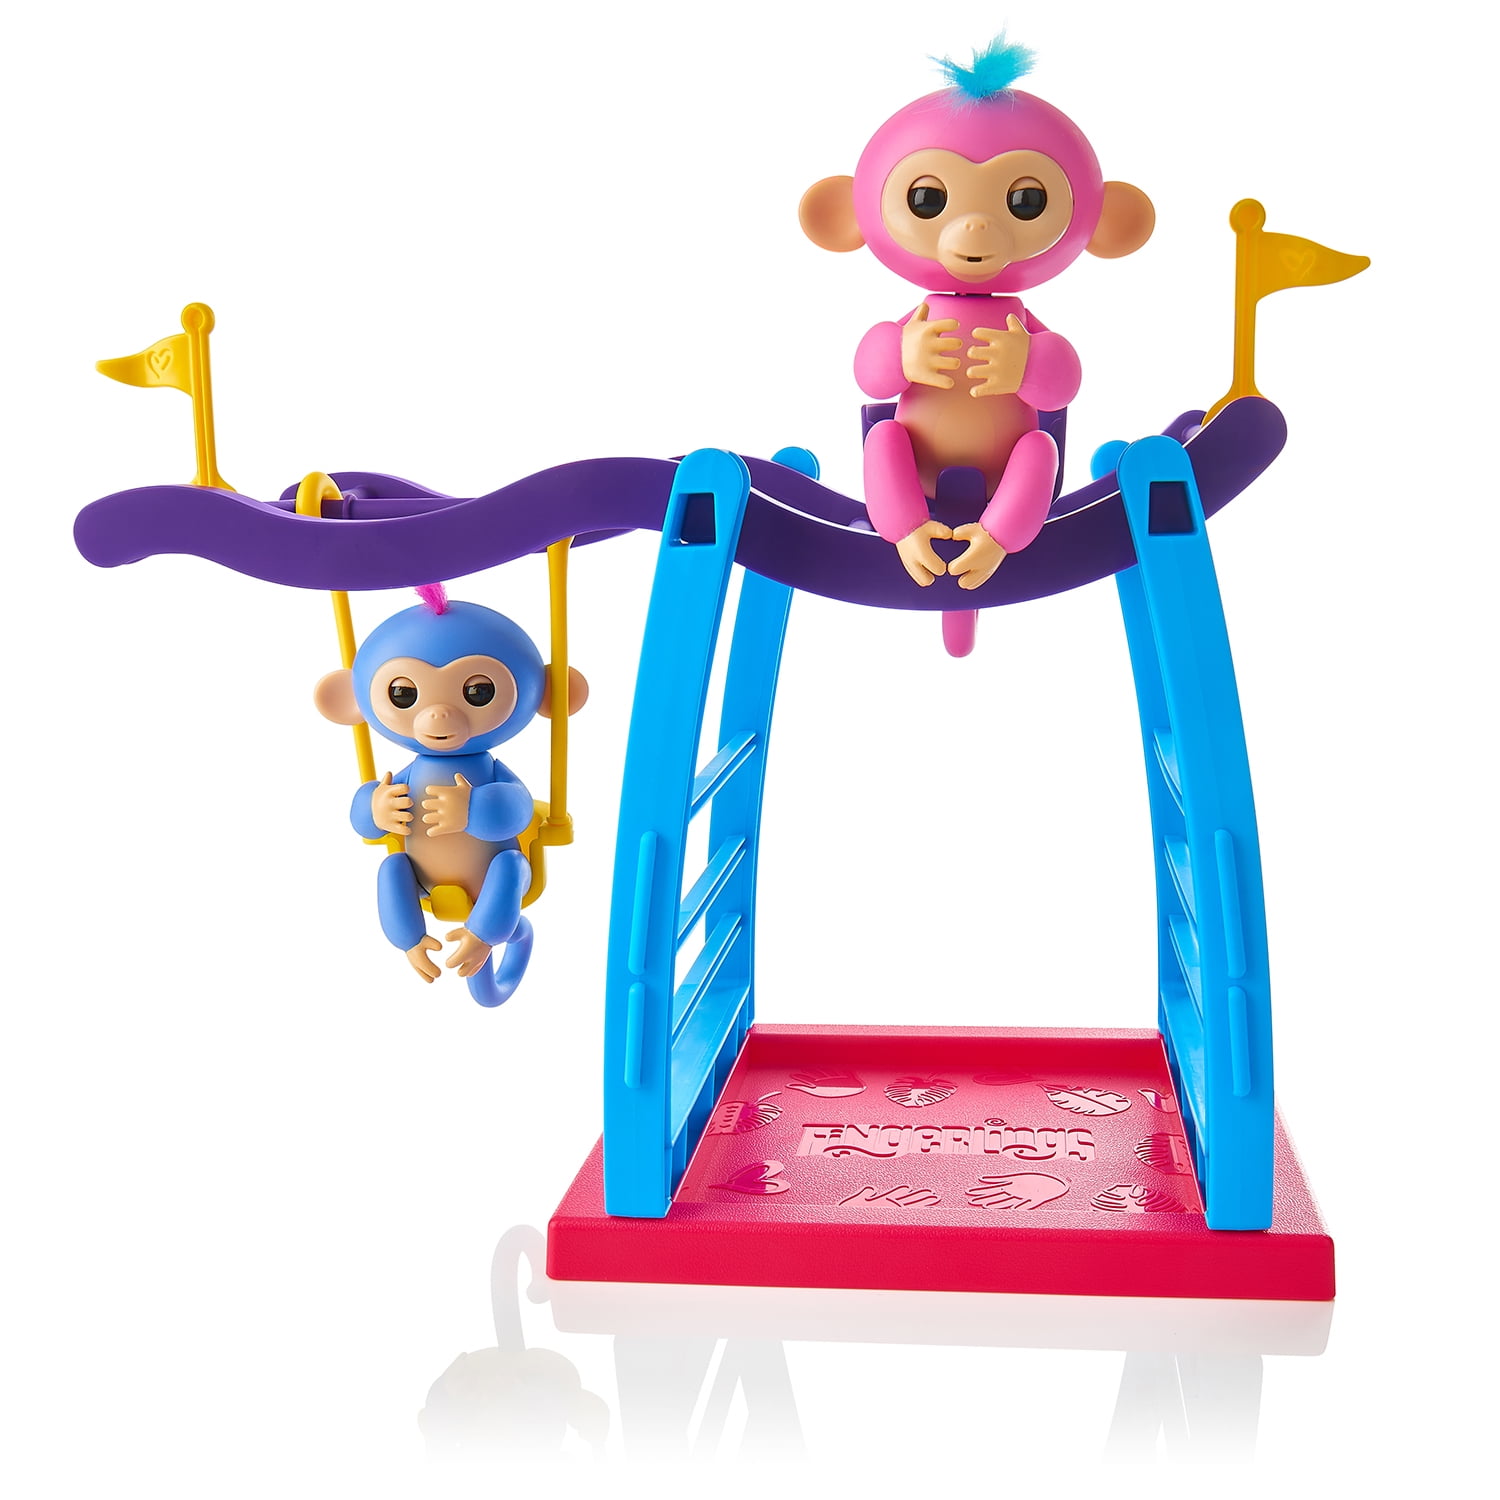 WowWee Fingerlings Twirl-a-whirl Carousel Playset With 1 Fingerling Monkey for sale online 